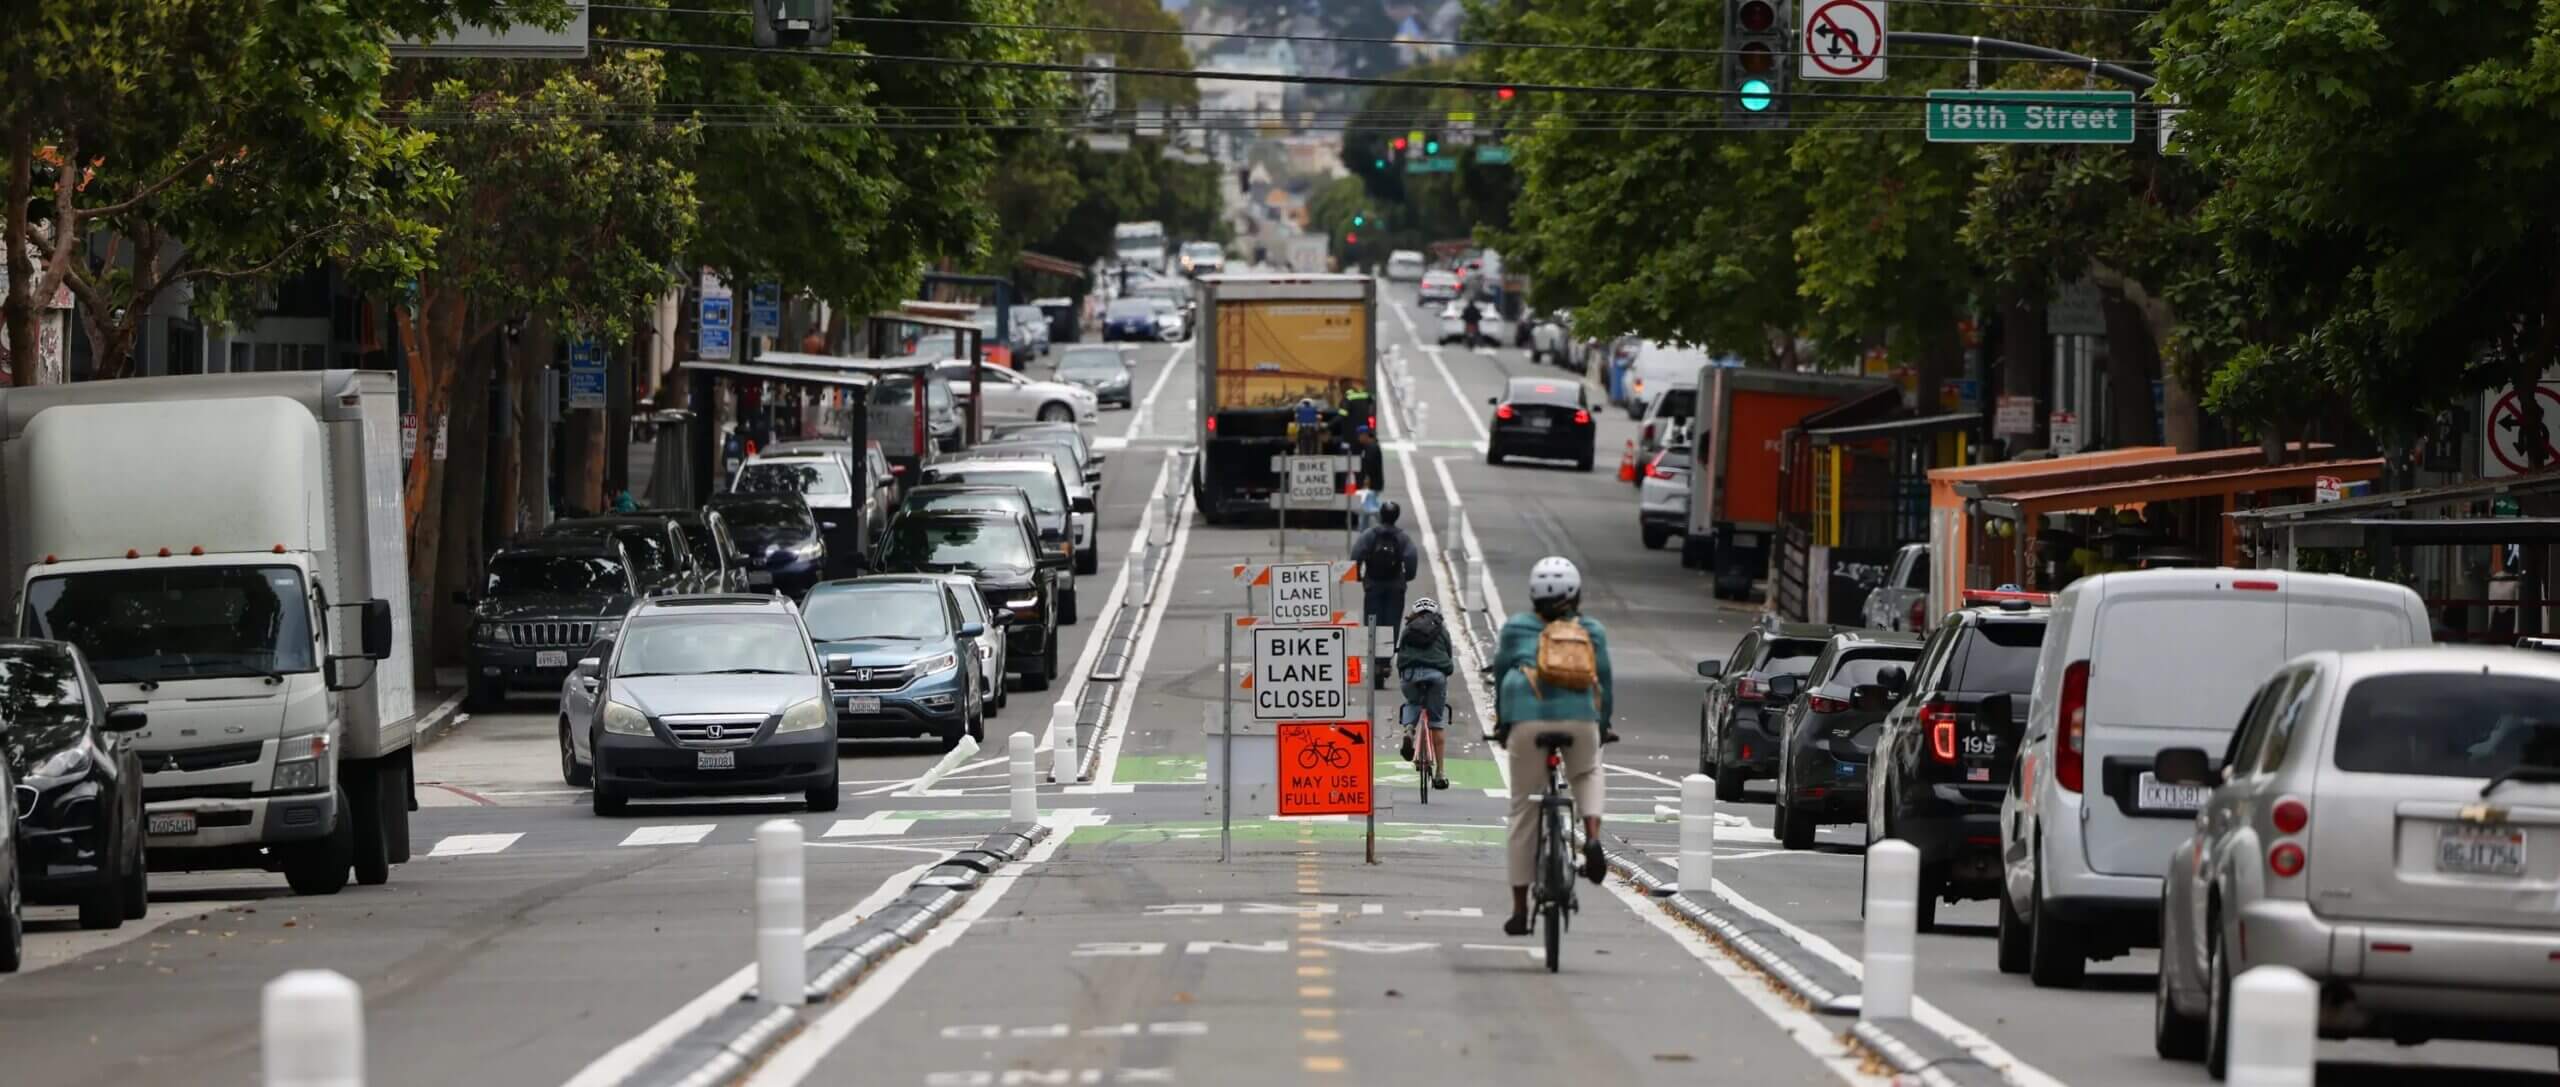 Group demands removal of San Francisco center bikeway after data shows cycling drop